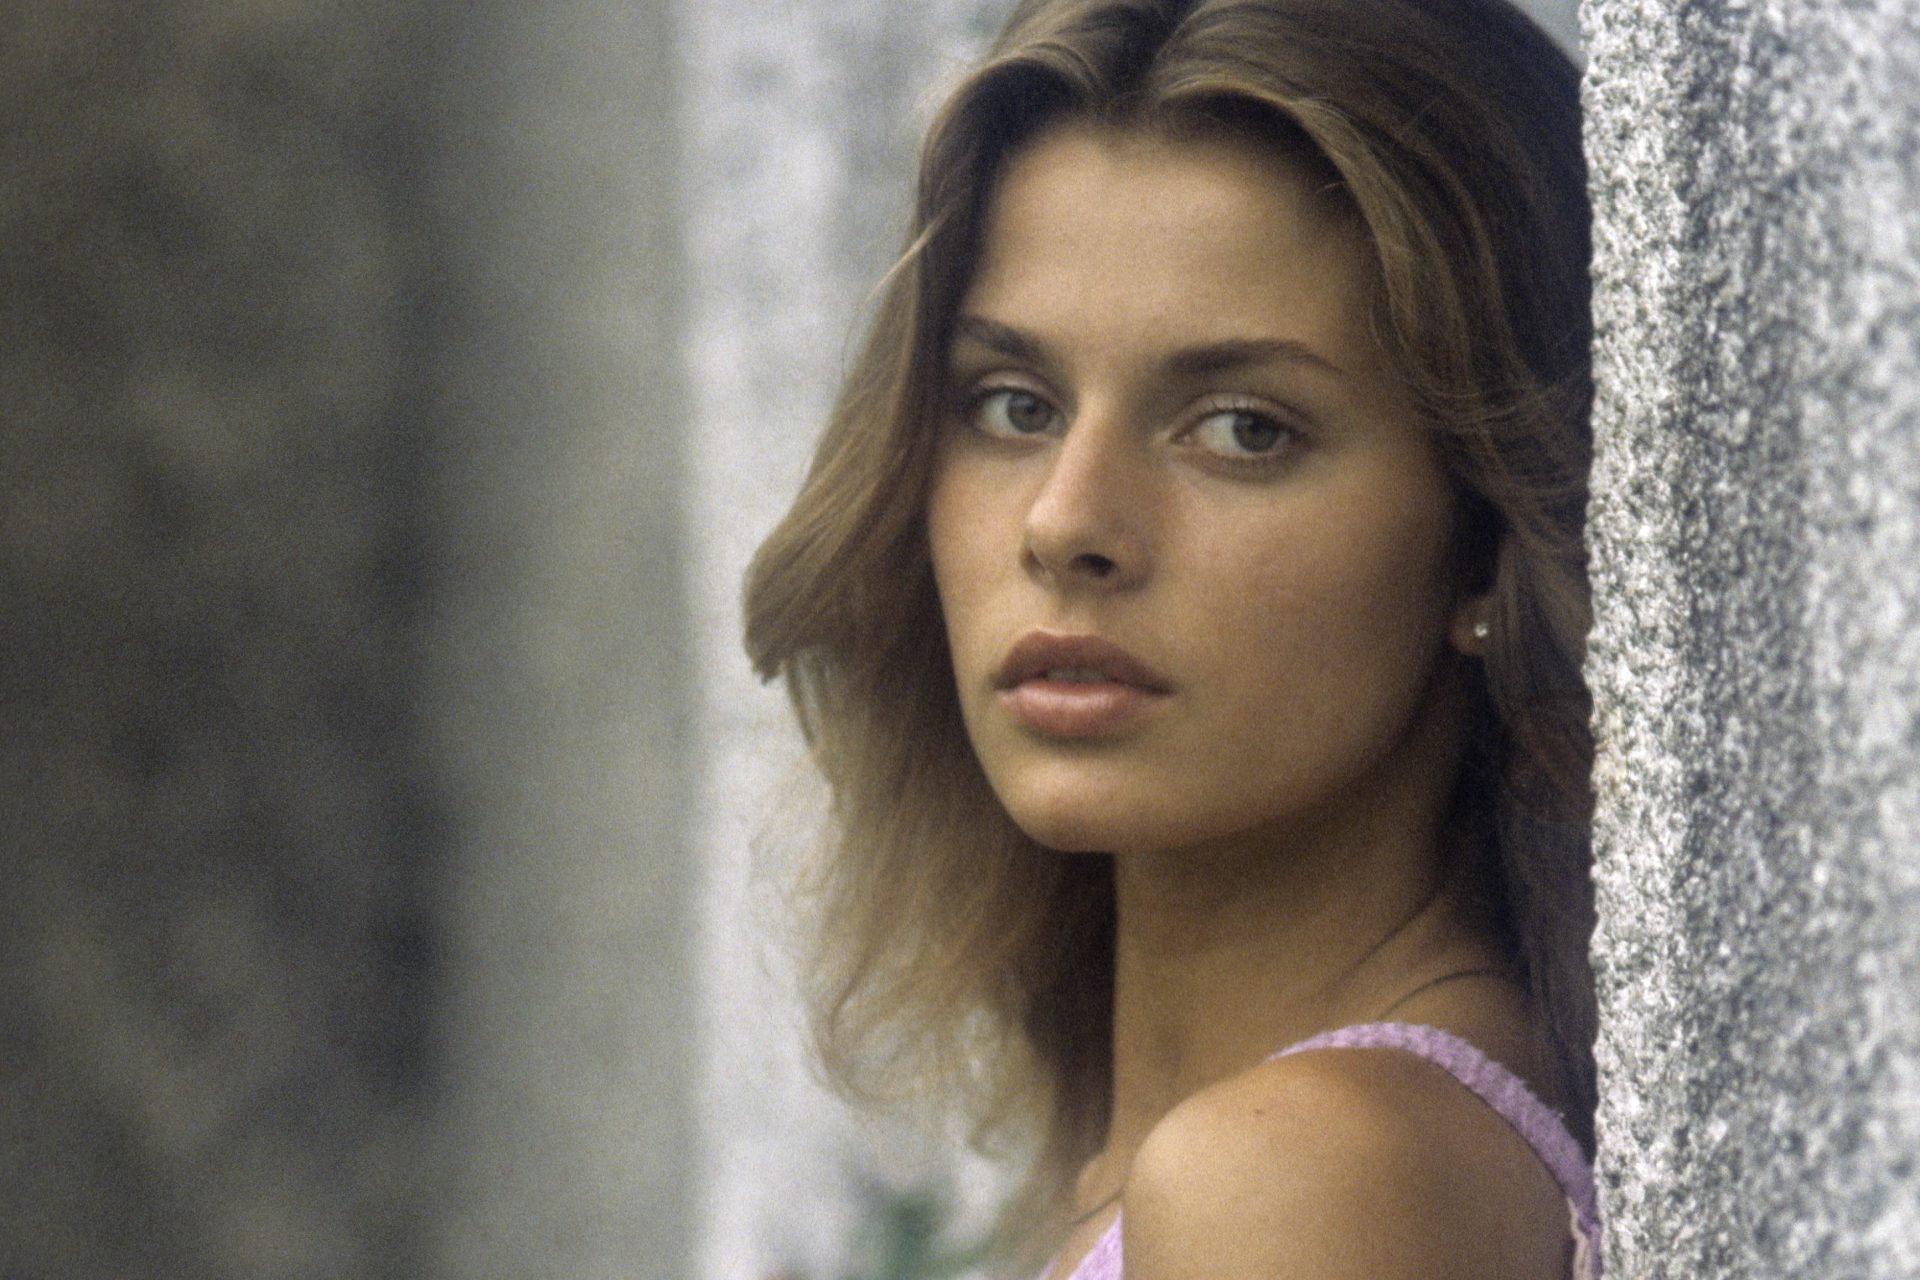 <p>Nastassja Kinski, born in 1961, comes from a lineage of talent. Her father, the famed German actor Klaus Kinski, known for 'For a Few Dollars More' (1965) and 'Who Knows?' (1966), played a significant, albeit dark, role in her life. In her autobiography, Nastassja's sister, Pola, paints their father as a tyrant who ab-used her from the ages of 5 to 19.</p> <p><a href="https://www.msn.com/en-us/community/channel/vid-w8hcuhvu3f8qr5wn5rk8xhsu5x8irqrgtxcypg4uxvn7tq9vkkfa">Don't want to miss the best entertainment news and analysis? Follow us here!</a></p>